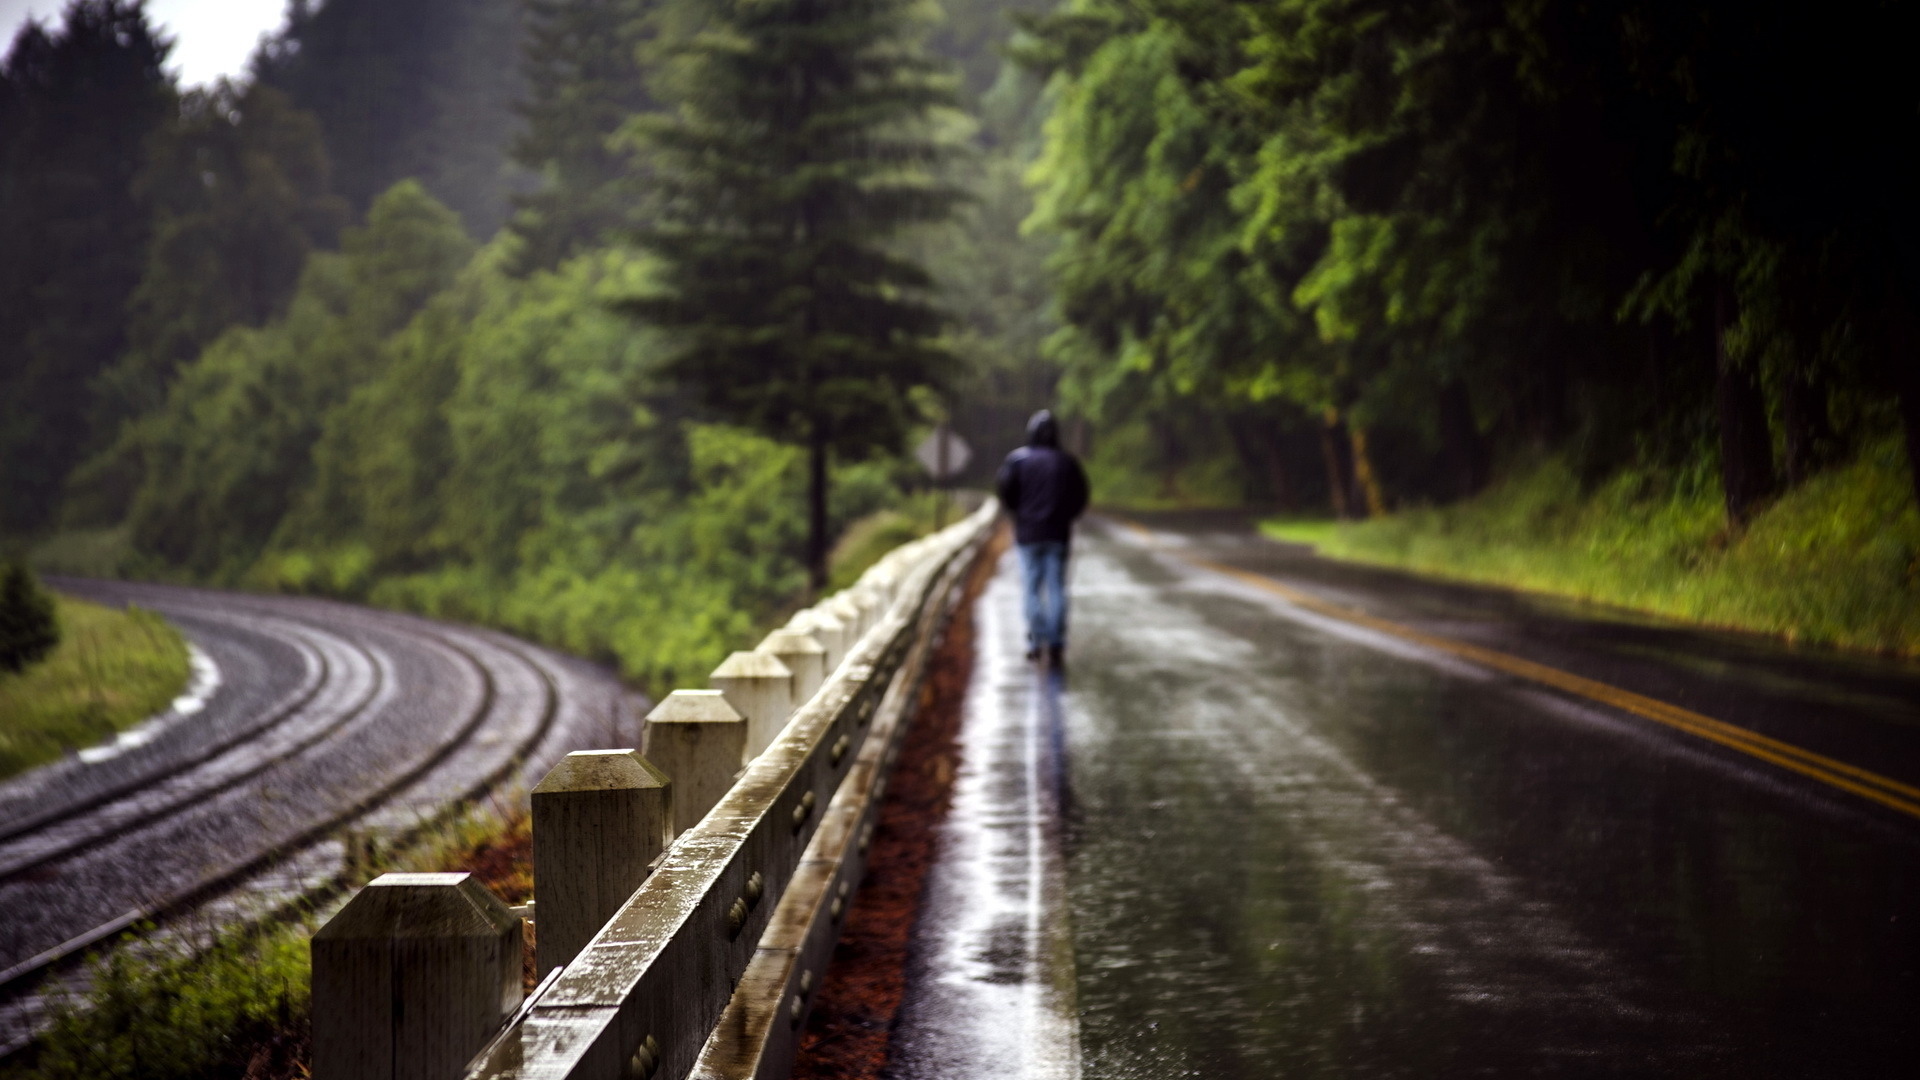 world, Roads, Railroad, Tracks, Fence, People, Men, Males, Mood, Alone, Nature, Landscapes, Trees, Forest, Storm, Rain, Wet Wallpaper